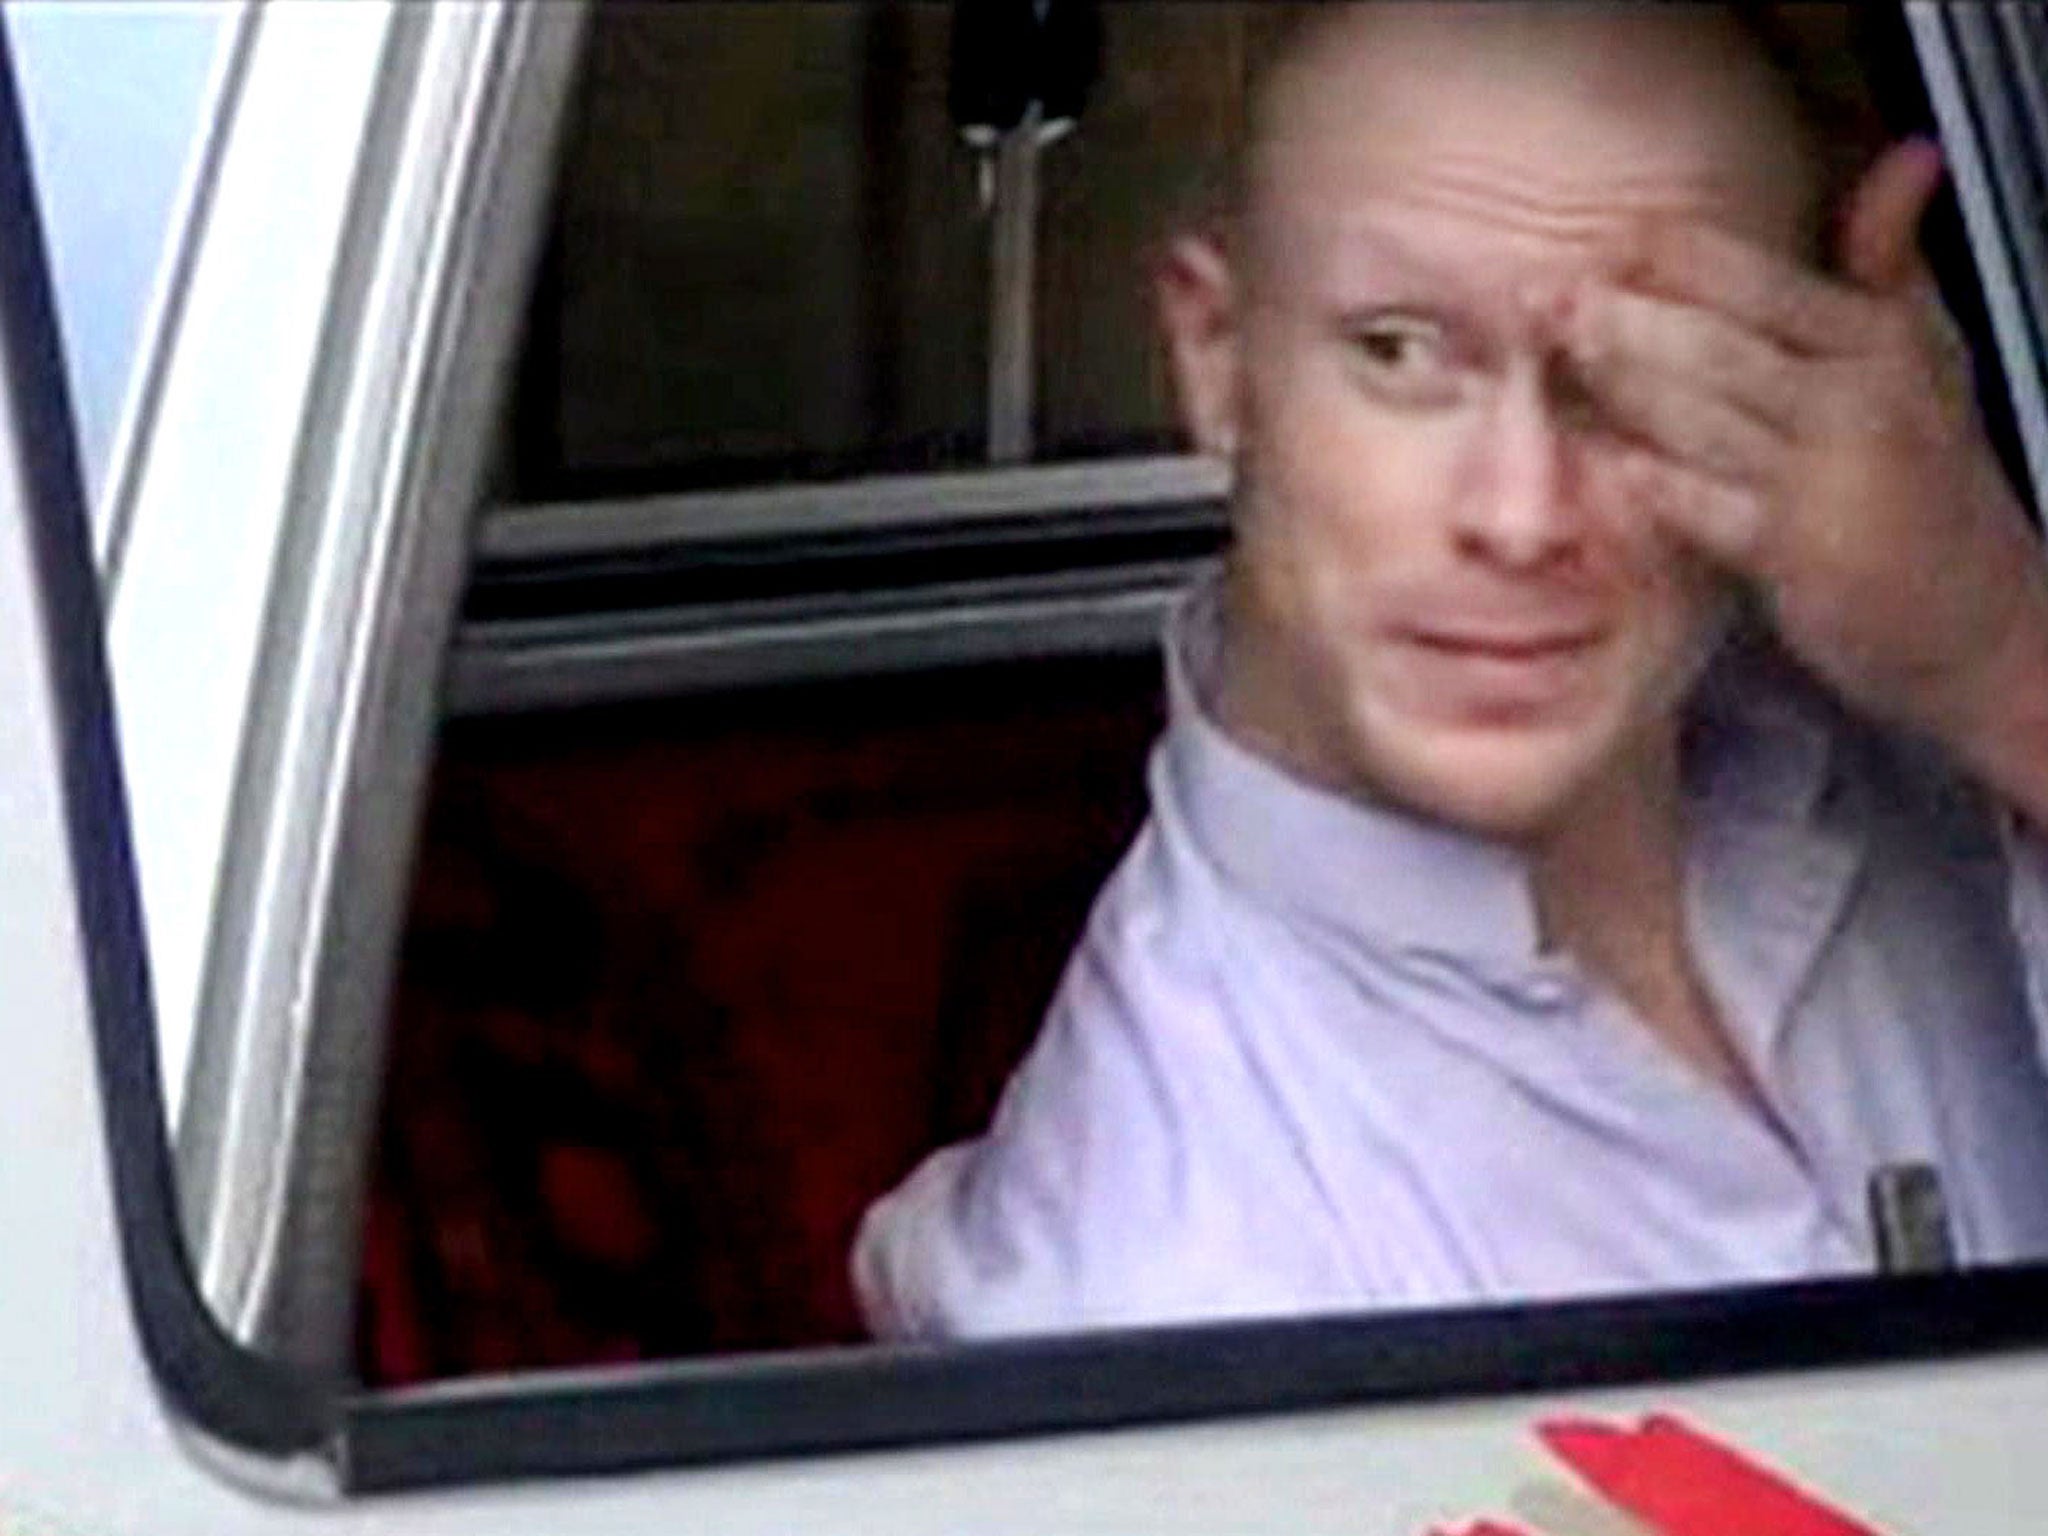 Sgt Bowe Bergdahl, sits in a vehicle guarded by the Taliban in eastern Afghanistan. Bergdahl was freed by the Taliban on 31 May, 2014, in exchange for five Afghan detainees held in the U.S. prison at Guantanamo Bay, Cuba